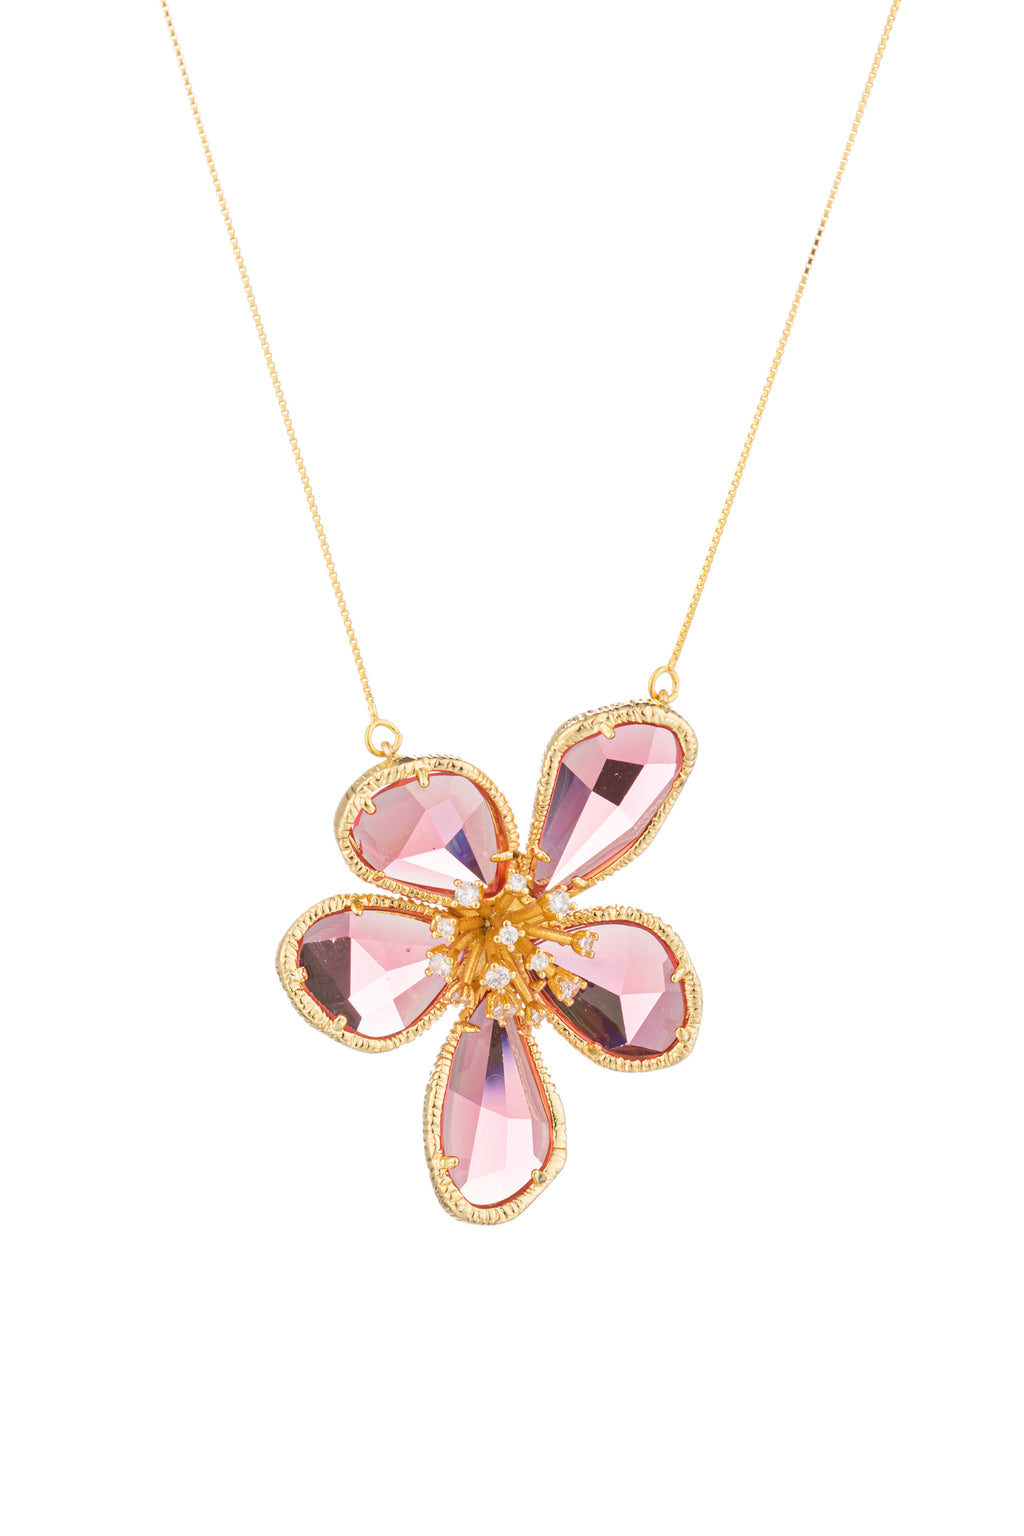 Gold tone sterling silver necklace with a CZ crystal flower pendant.